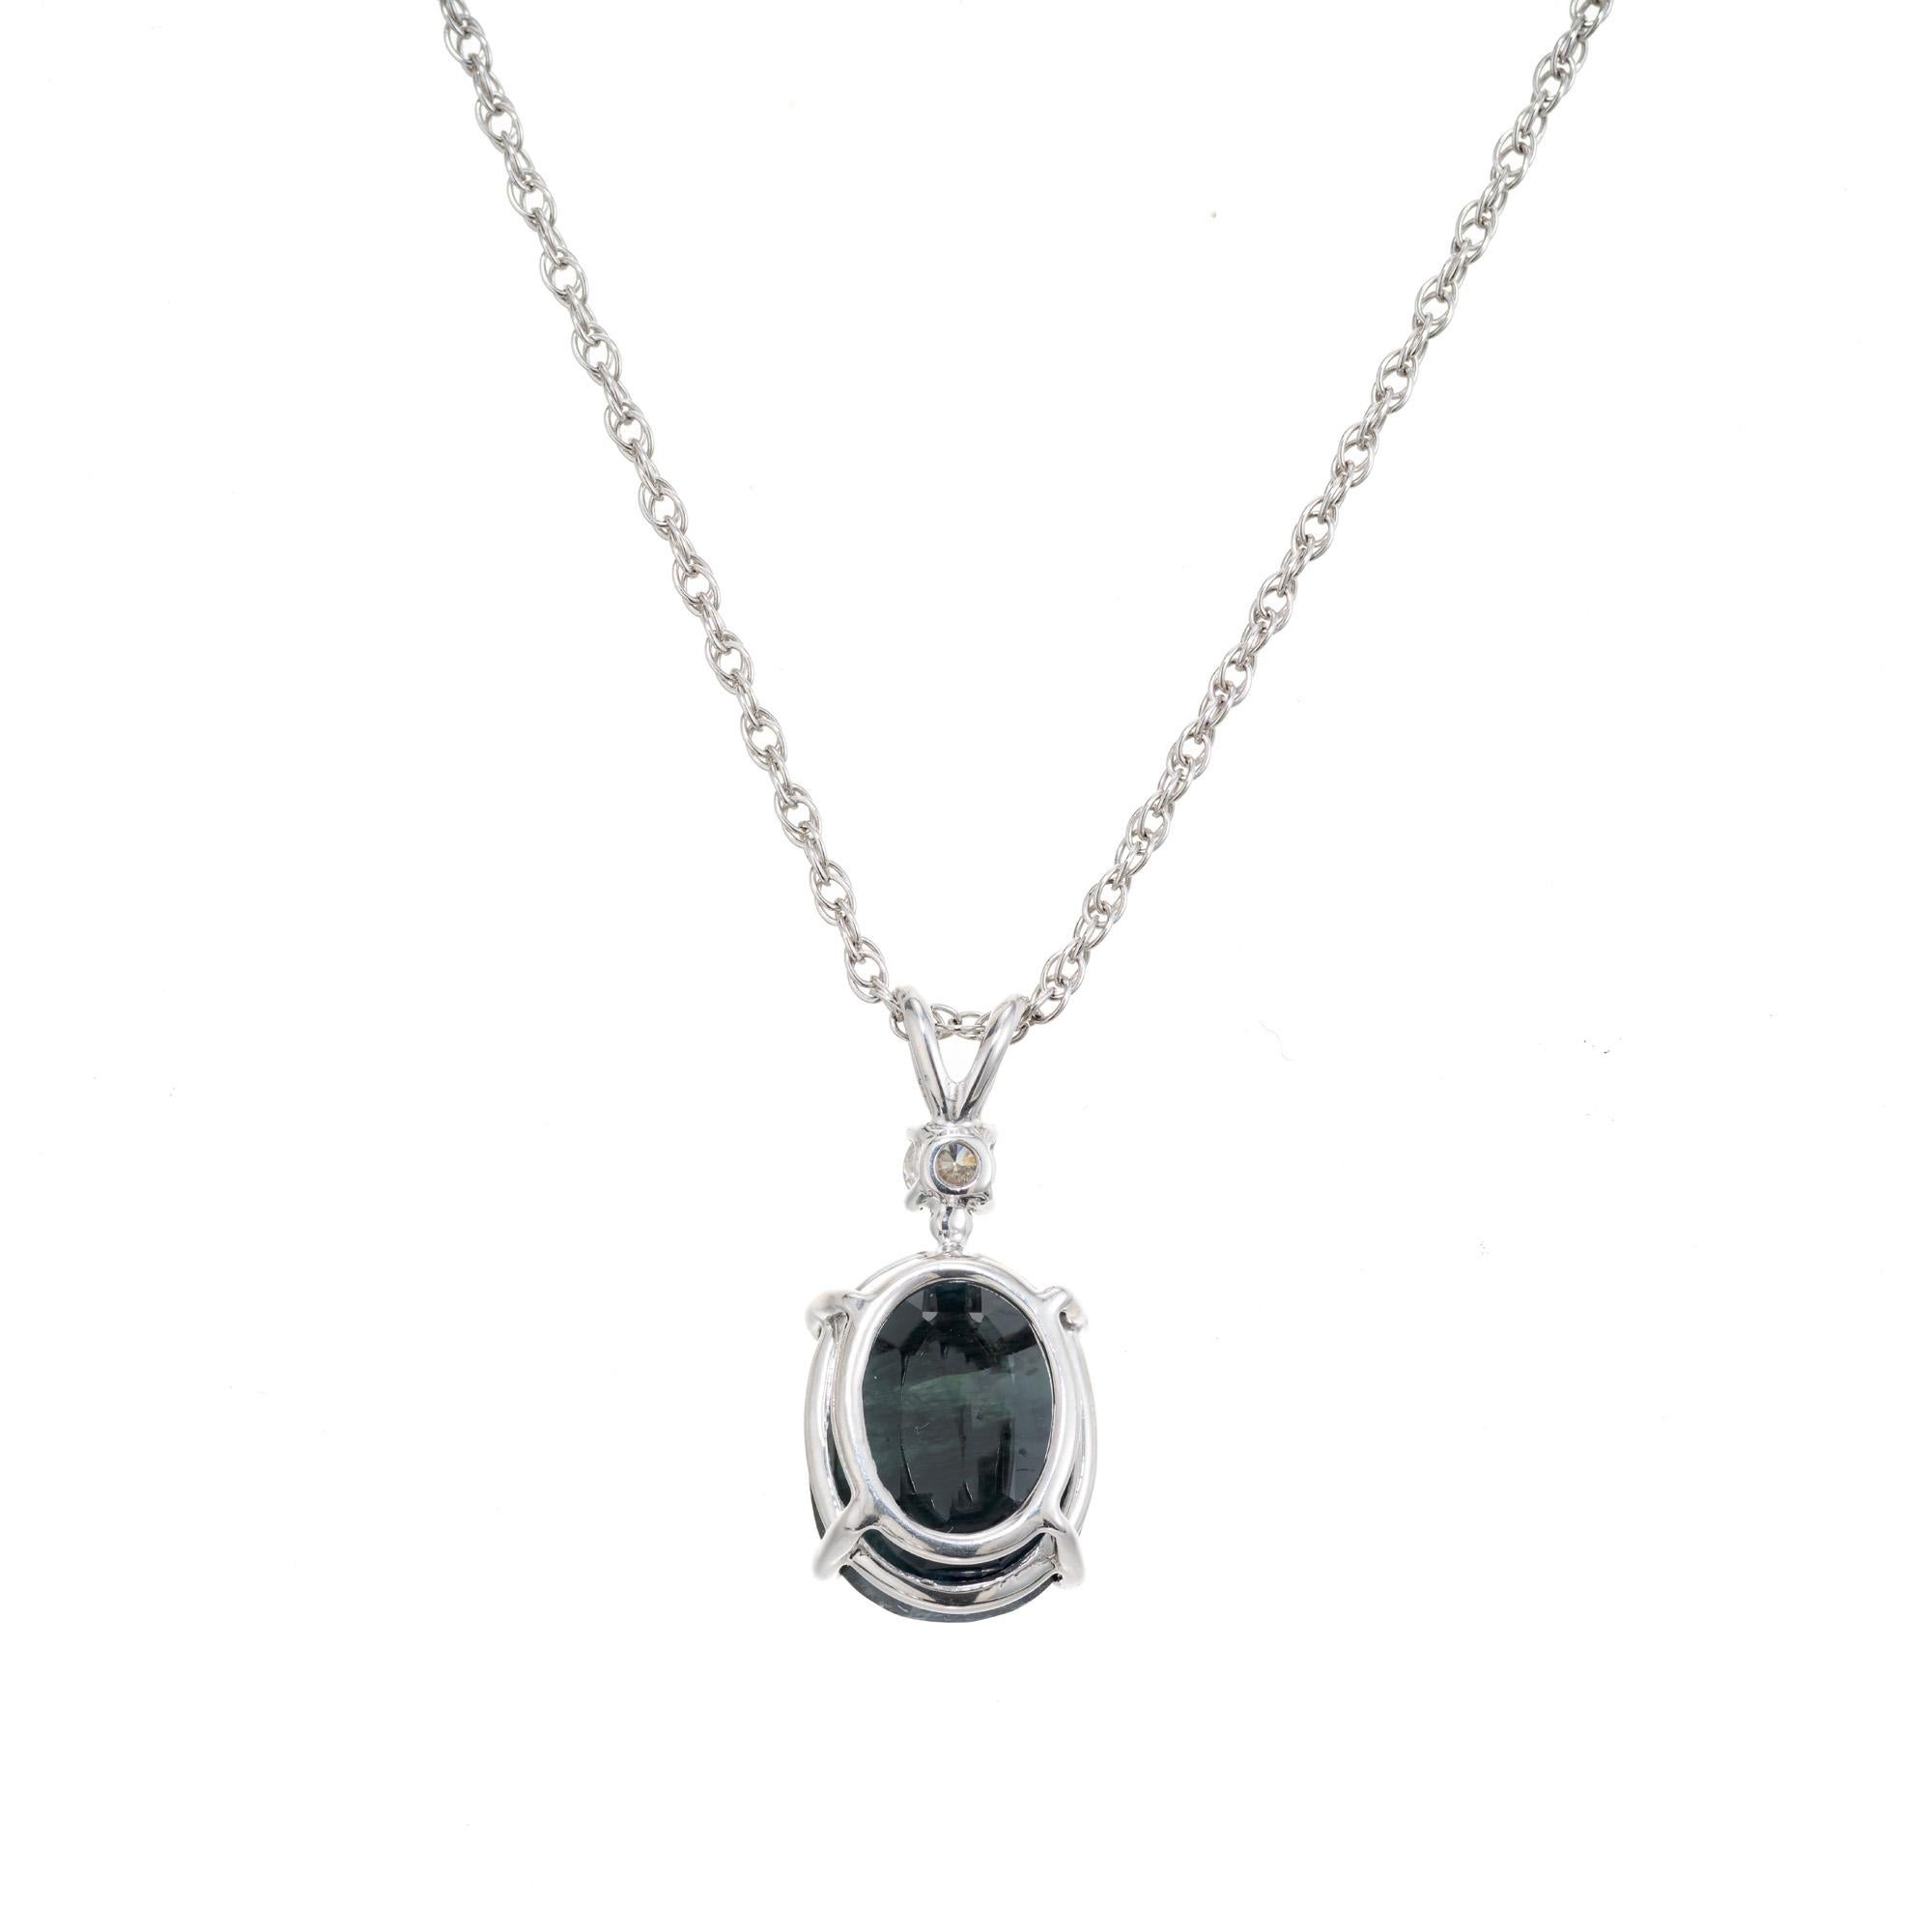 Sapphire and diamond pendant necklace. GIA oval certified dark blue 5.44ct sapphire set in a t simple 4 prong 14k white gold setting accented with one round .8ct diamond set above. The pendant is finished off with a 14k white gold link chain.  The